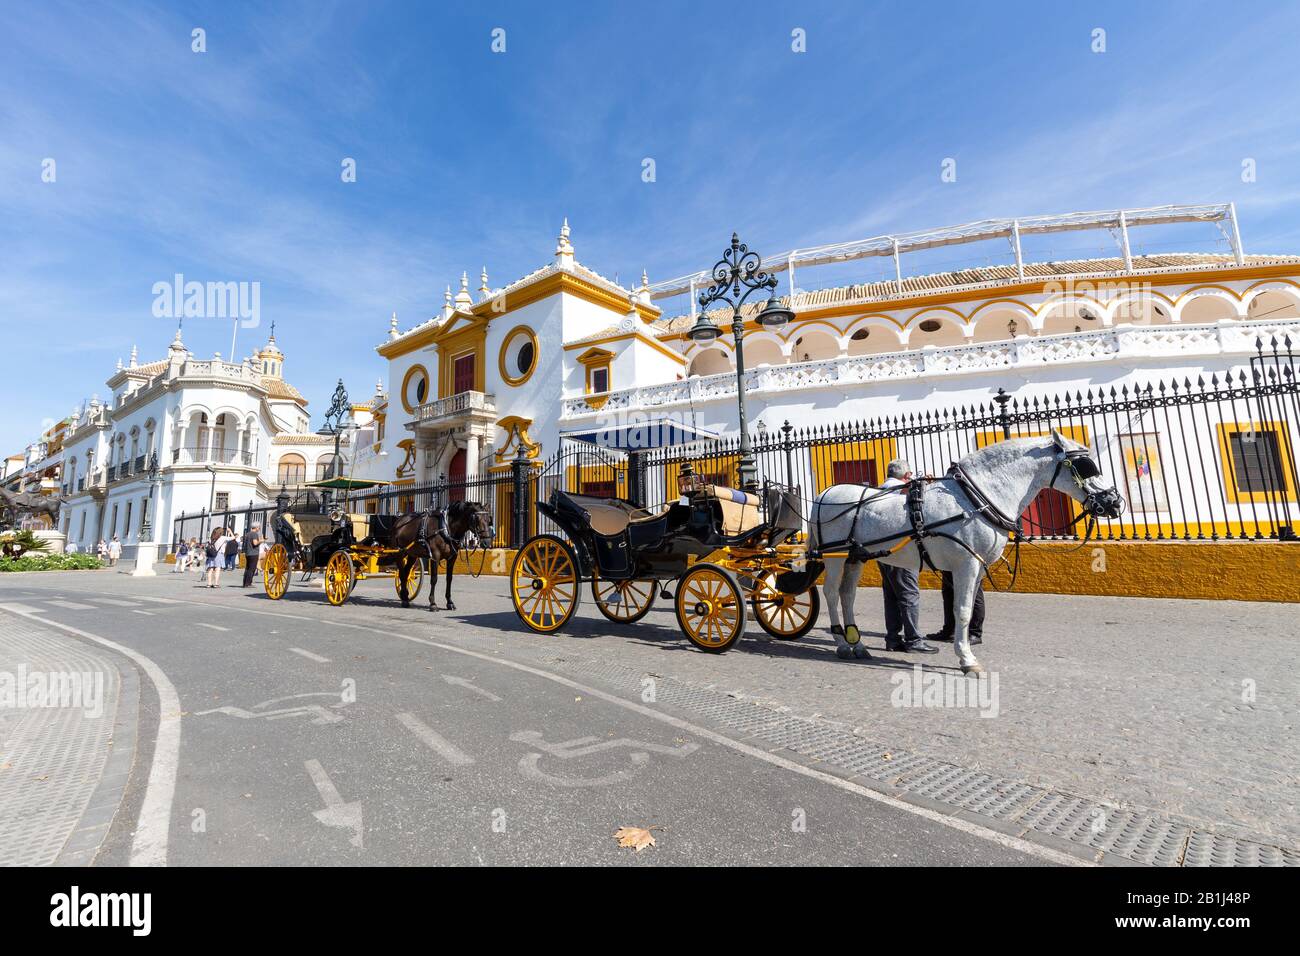 Horse-drawn carriages waiting in front of the entrance to the Bullfighting arena of Seville, Andalucia, Spain. Stock Photo